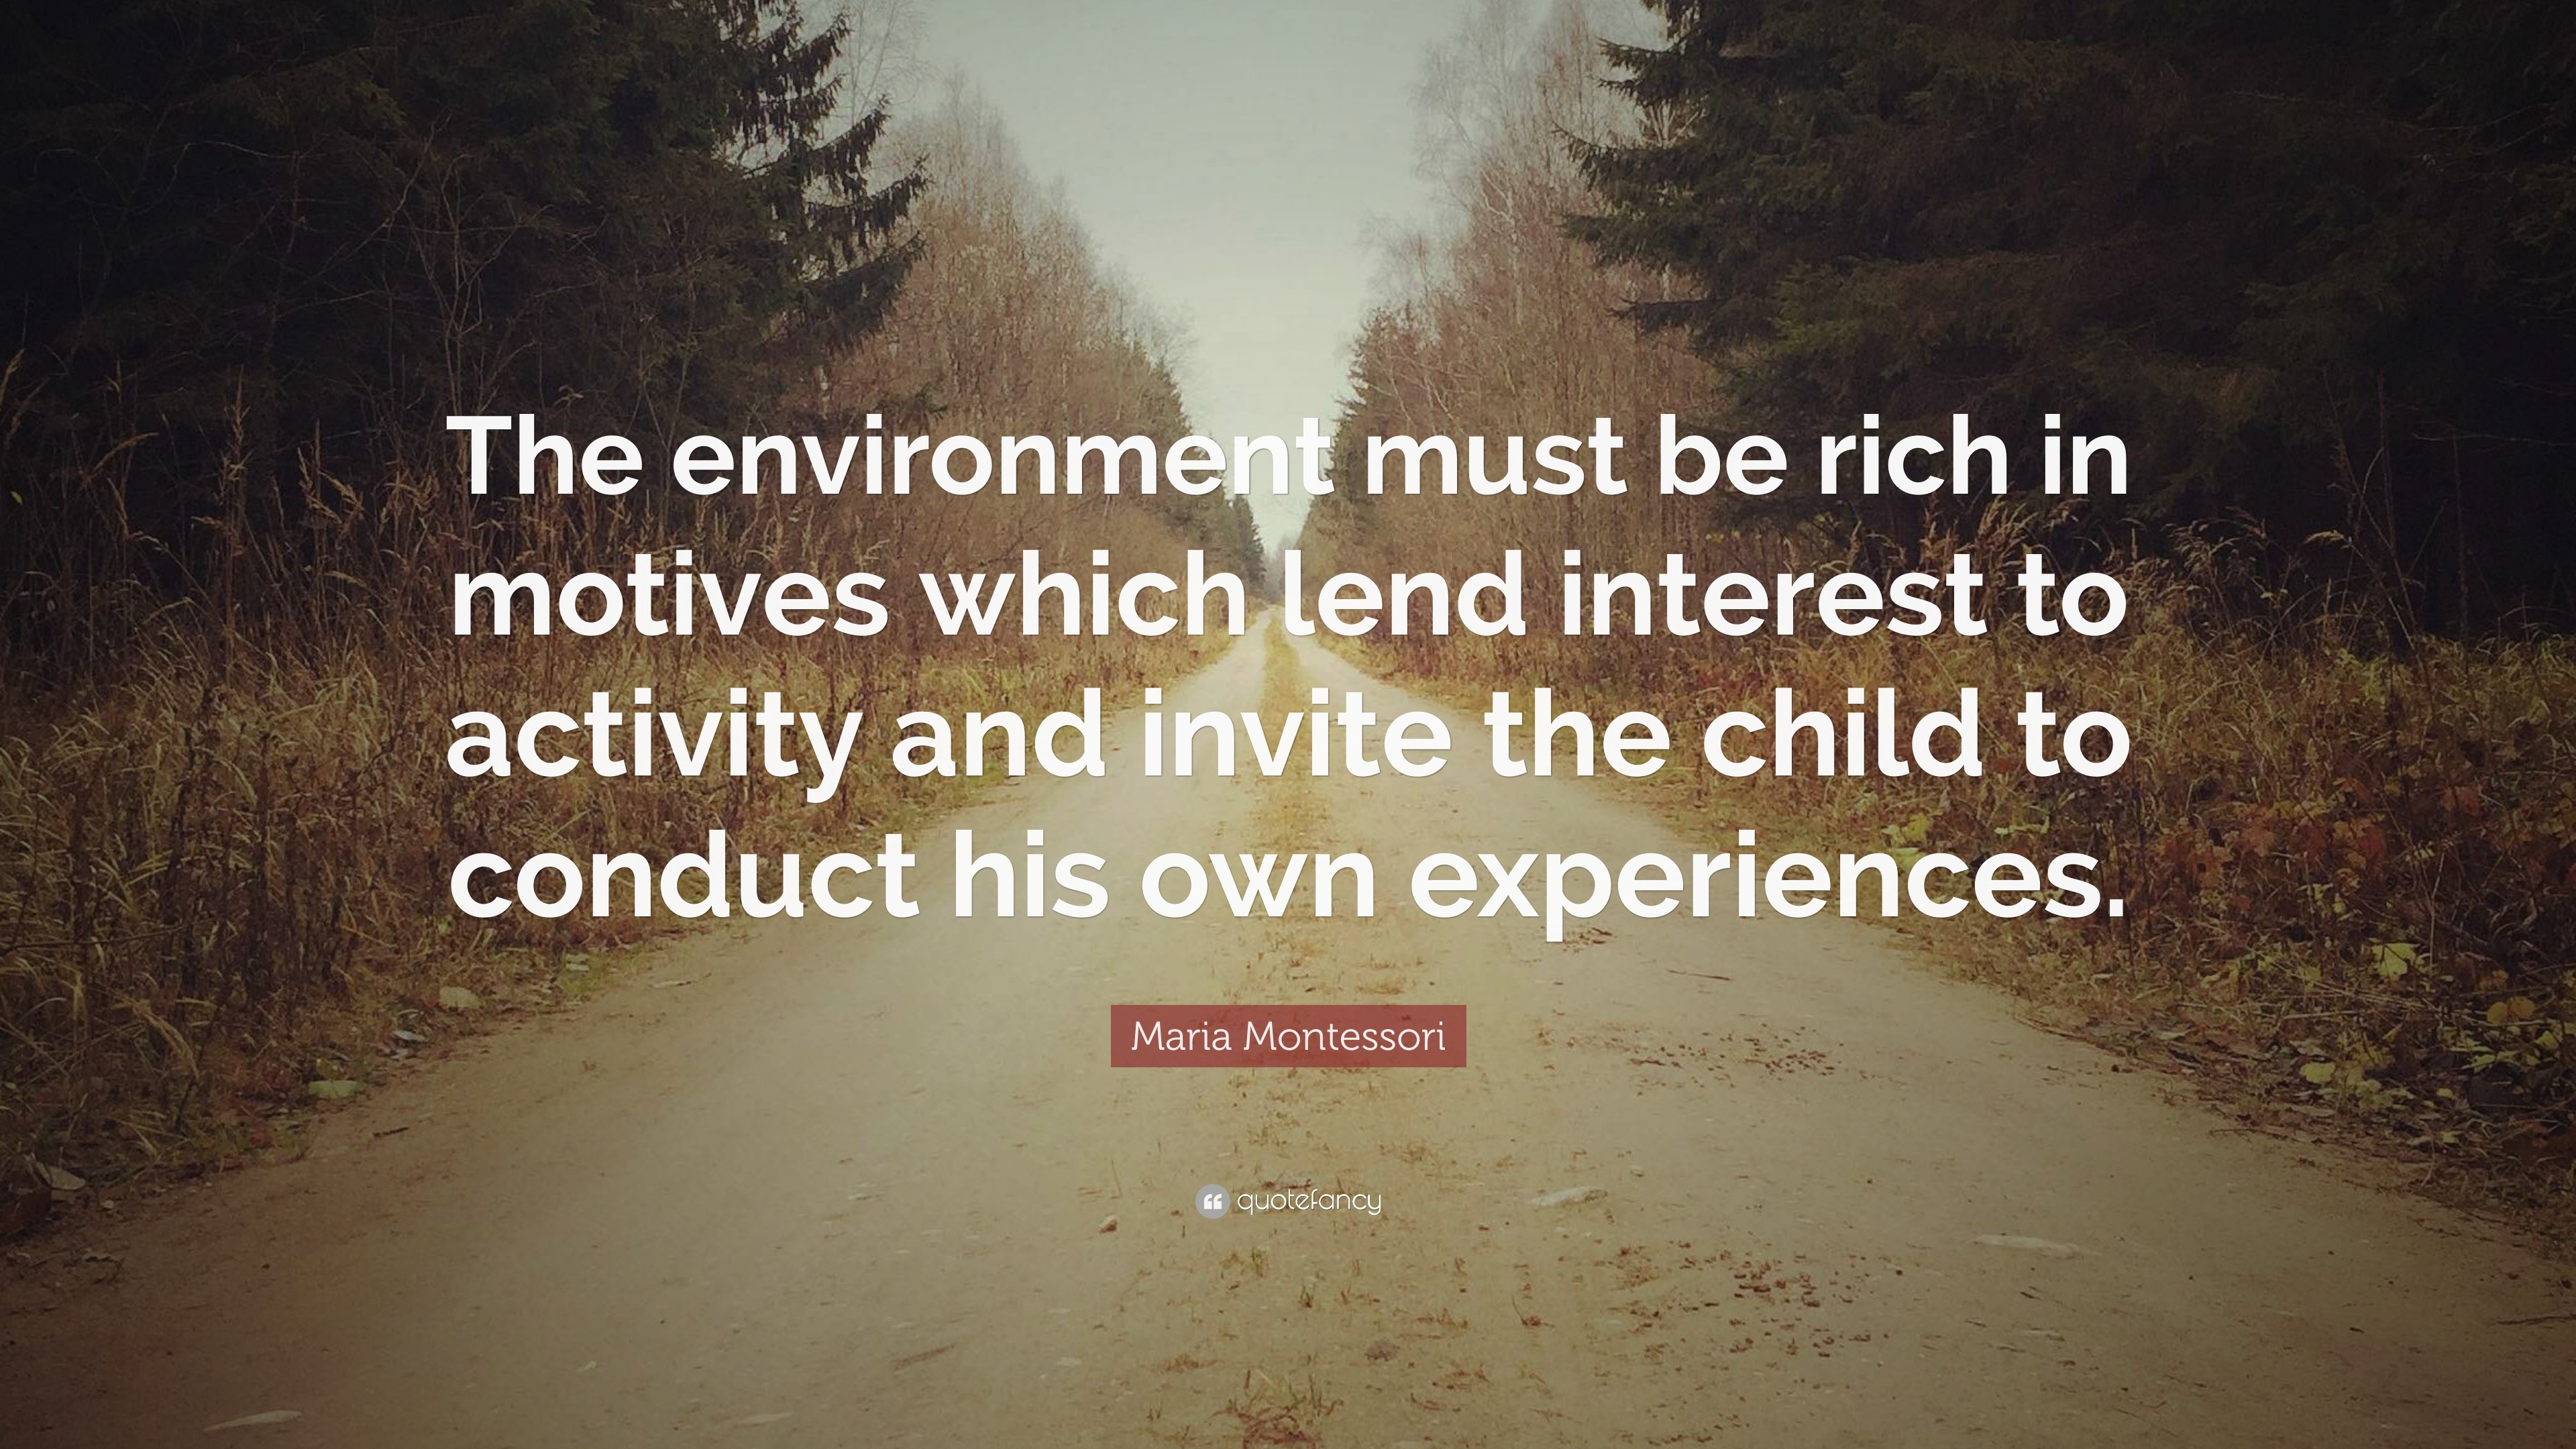 Maria Montessori Quote: “The environment must be rich in motives which